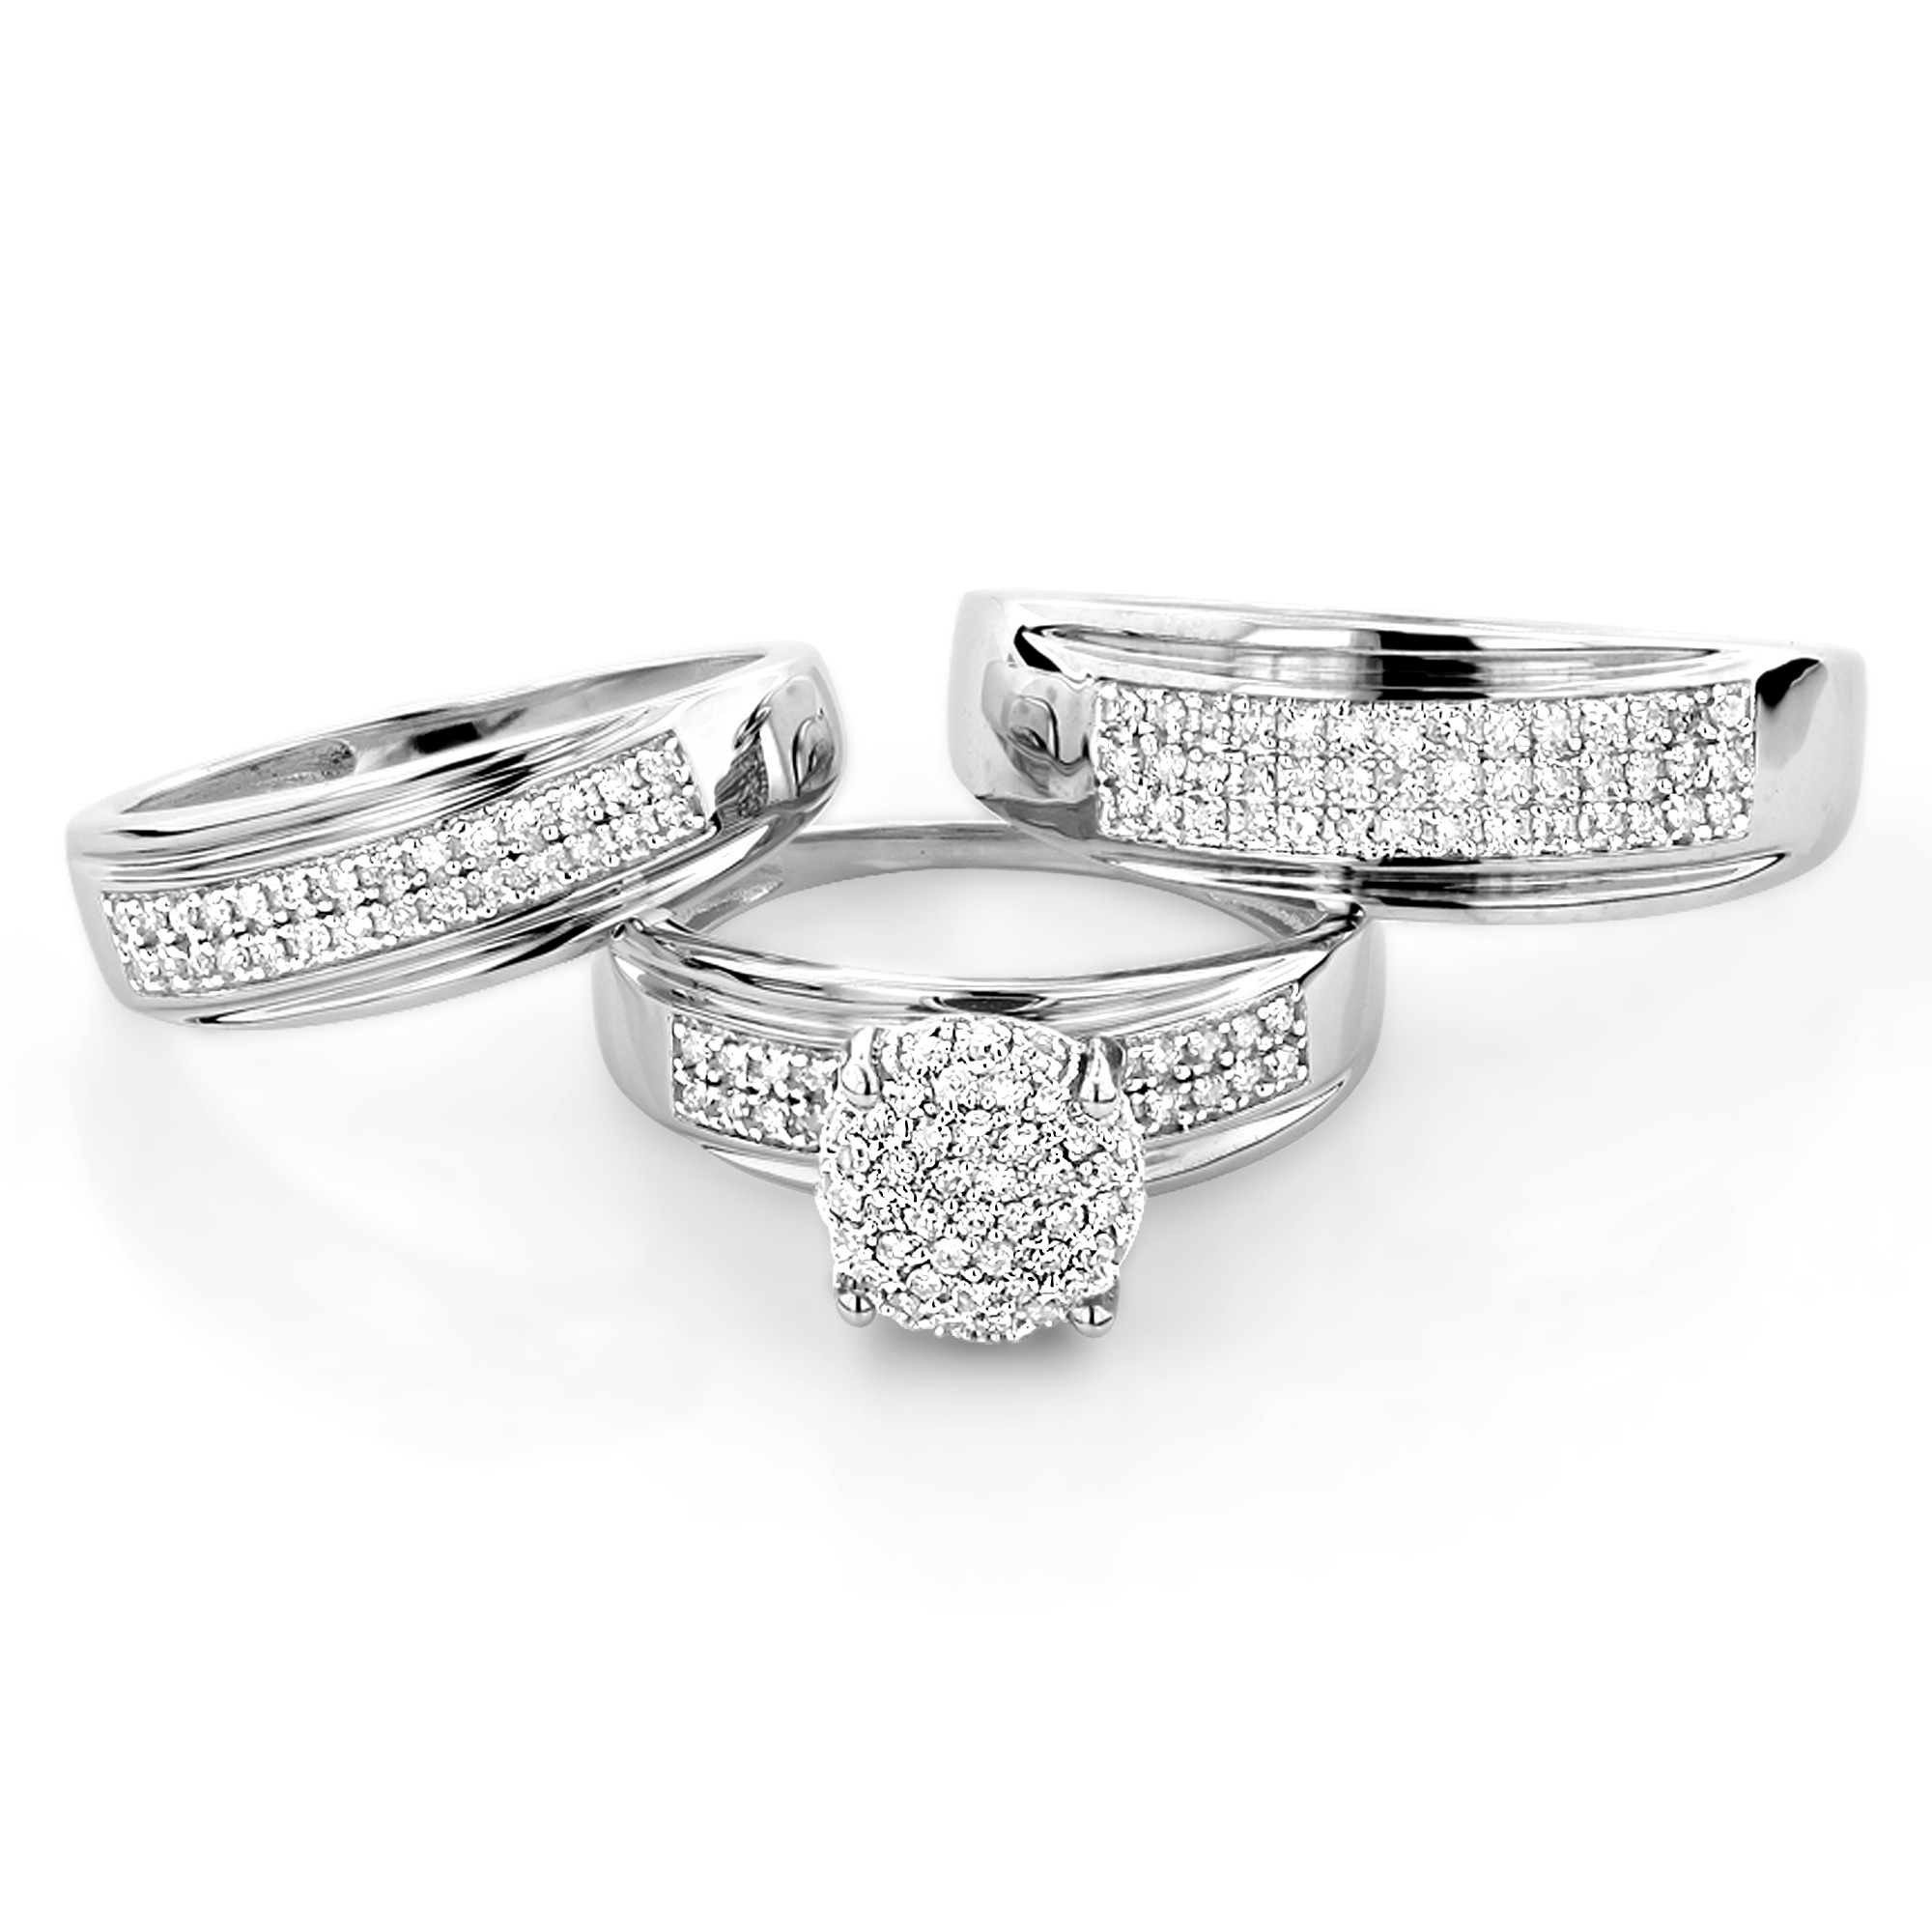 Wedding Ring Set His And Hers
 10K Gold Engagement Trio Diamond His and Hers Wedding Ring